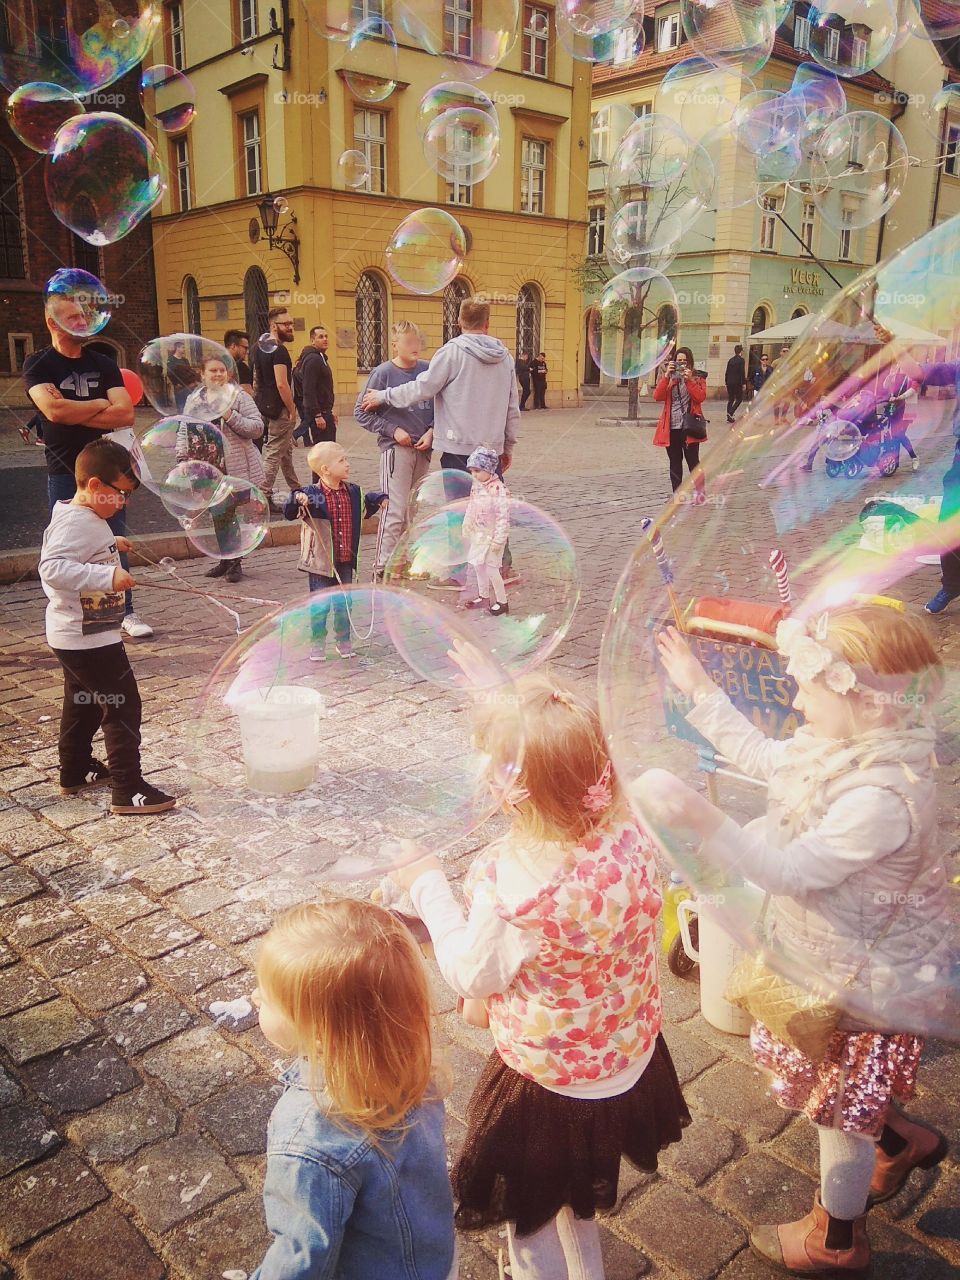 Kids plus bubbles - this combination make you want to become a kid yourself! 

Wrocław, Poland